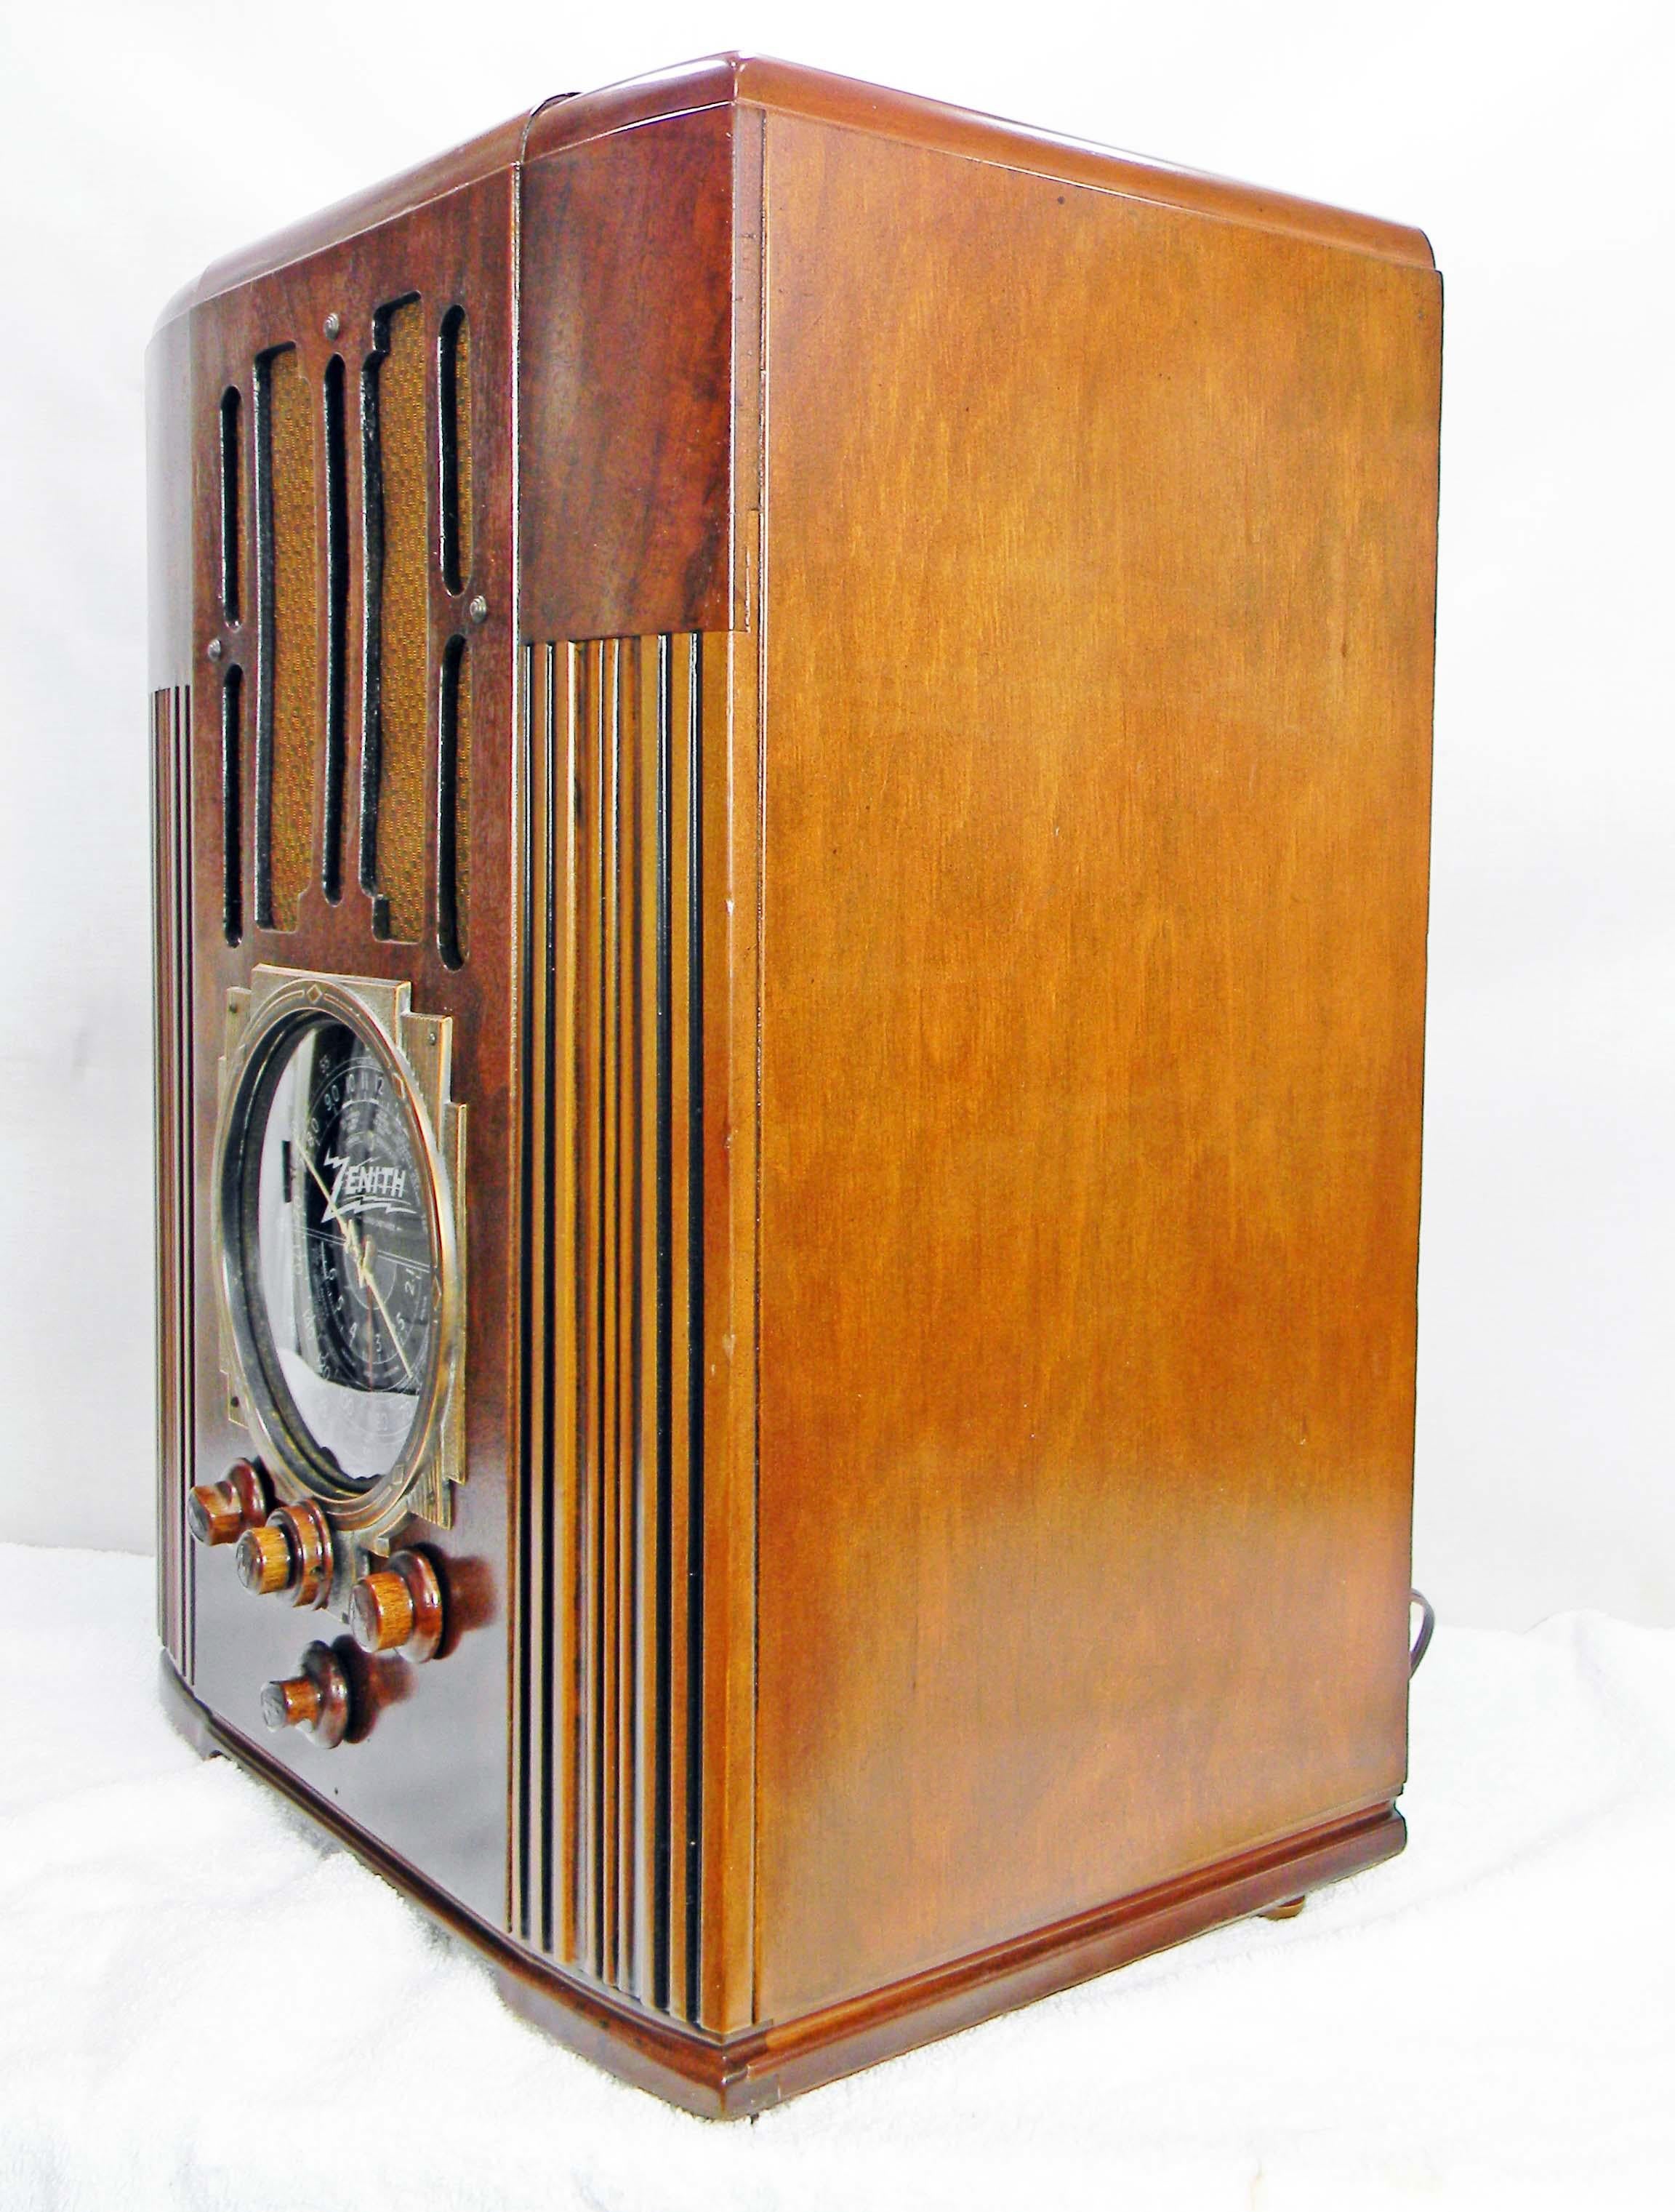 Zenith Model 9-S-30 Tombstone (1936) Art Deco Bluetooth Tube Radio. This model is a rare one, as they were expensive in the depths of the Depression. This was one of the models that employed a console chassis in a large table style cabinet.